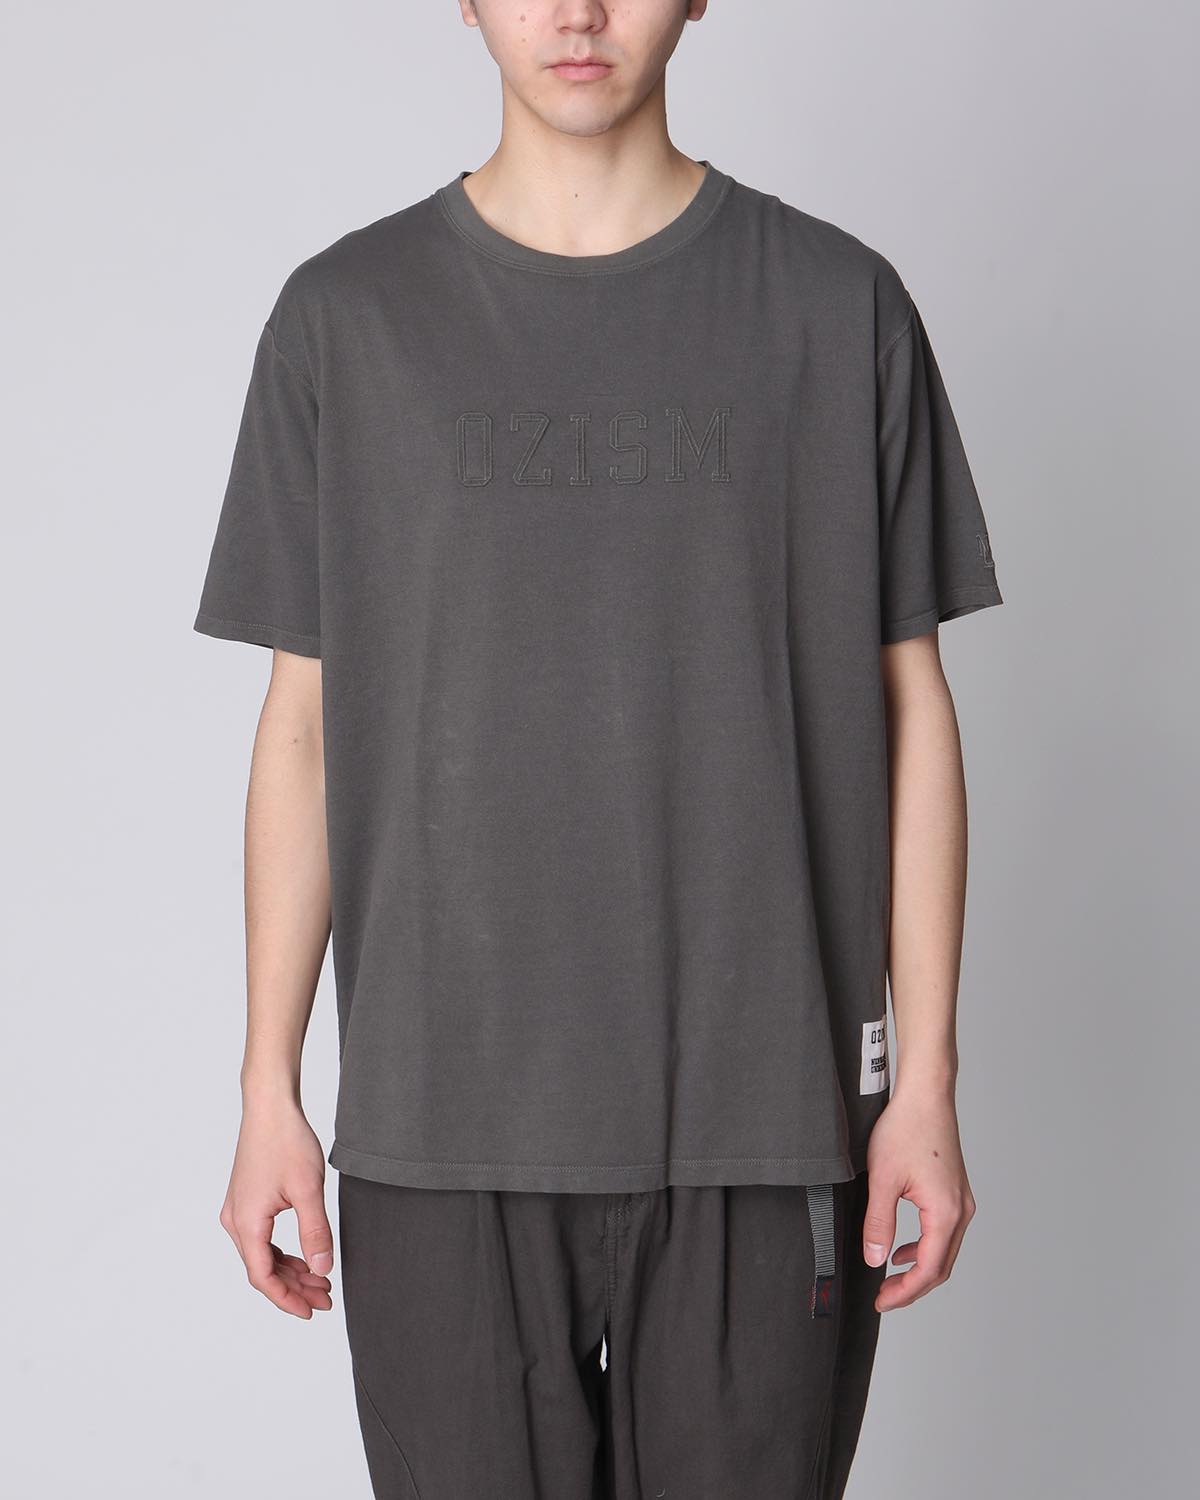 MONK SS TEE COTTON PAPER JERSEY OVERDYED